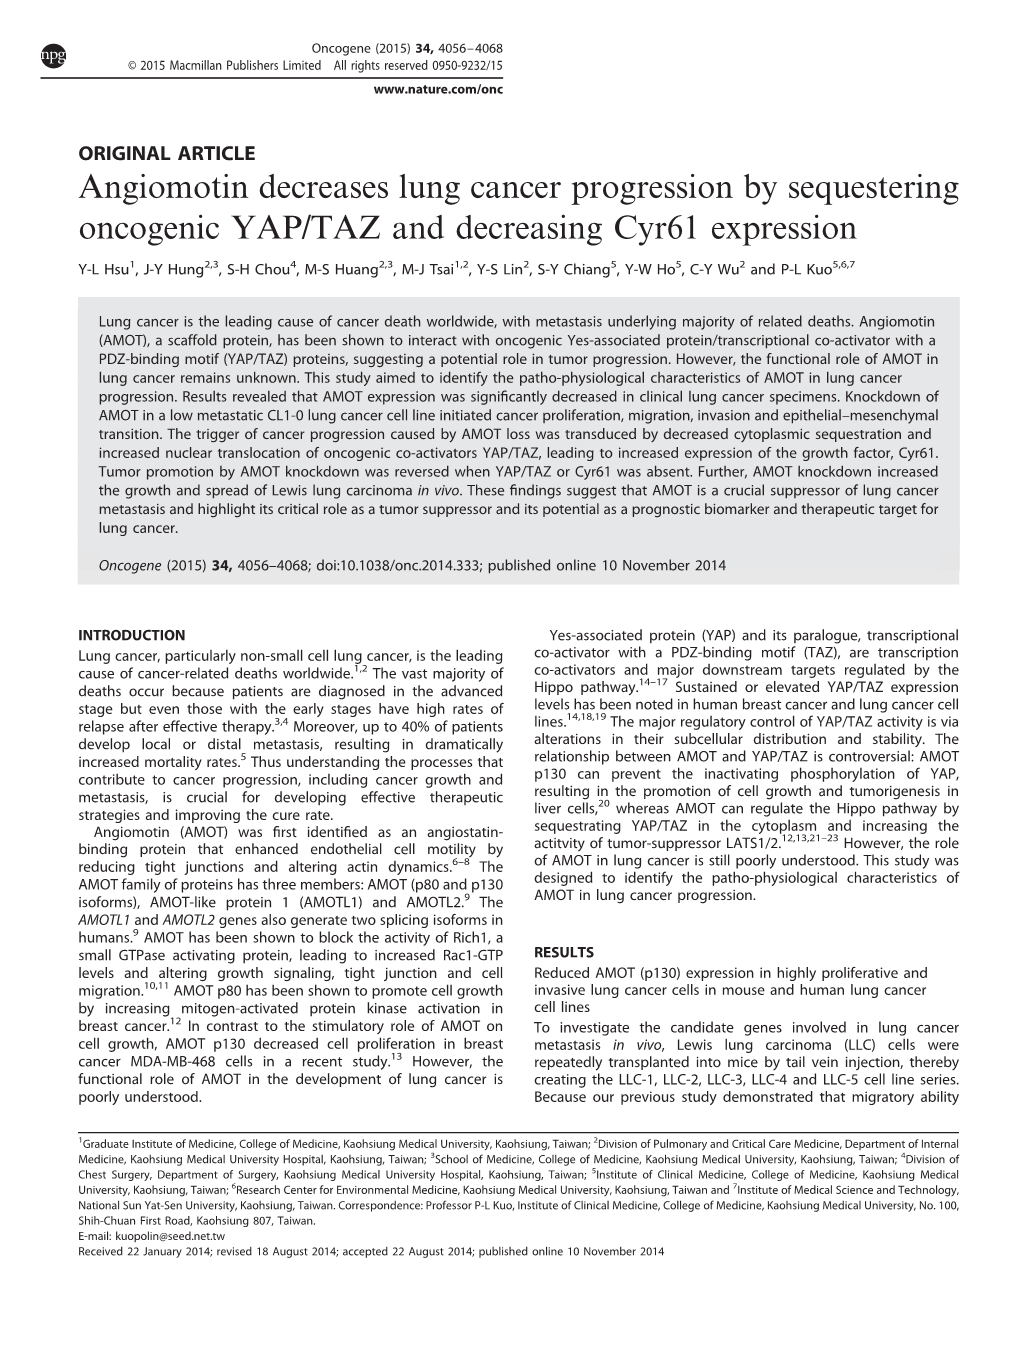 Angiomotin Decreases Lung Cancer Progression by Sequestering Oncogenic YAP/TAZ and Decreasing Cyr61 Expression